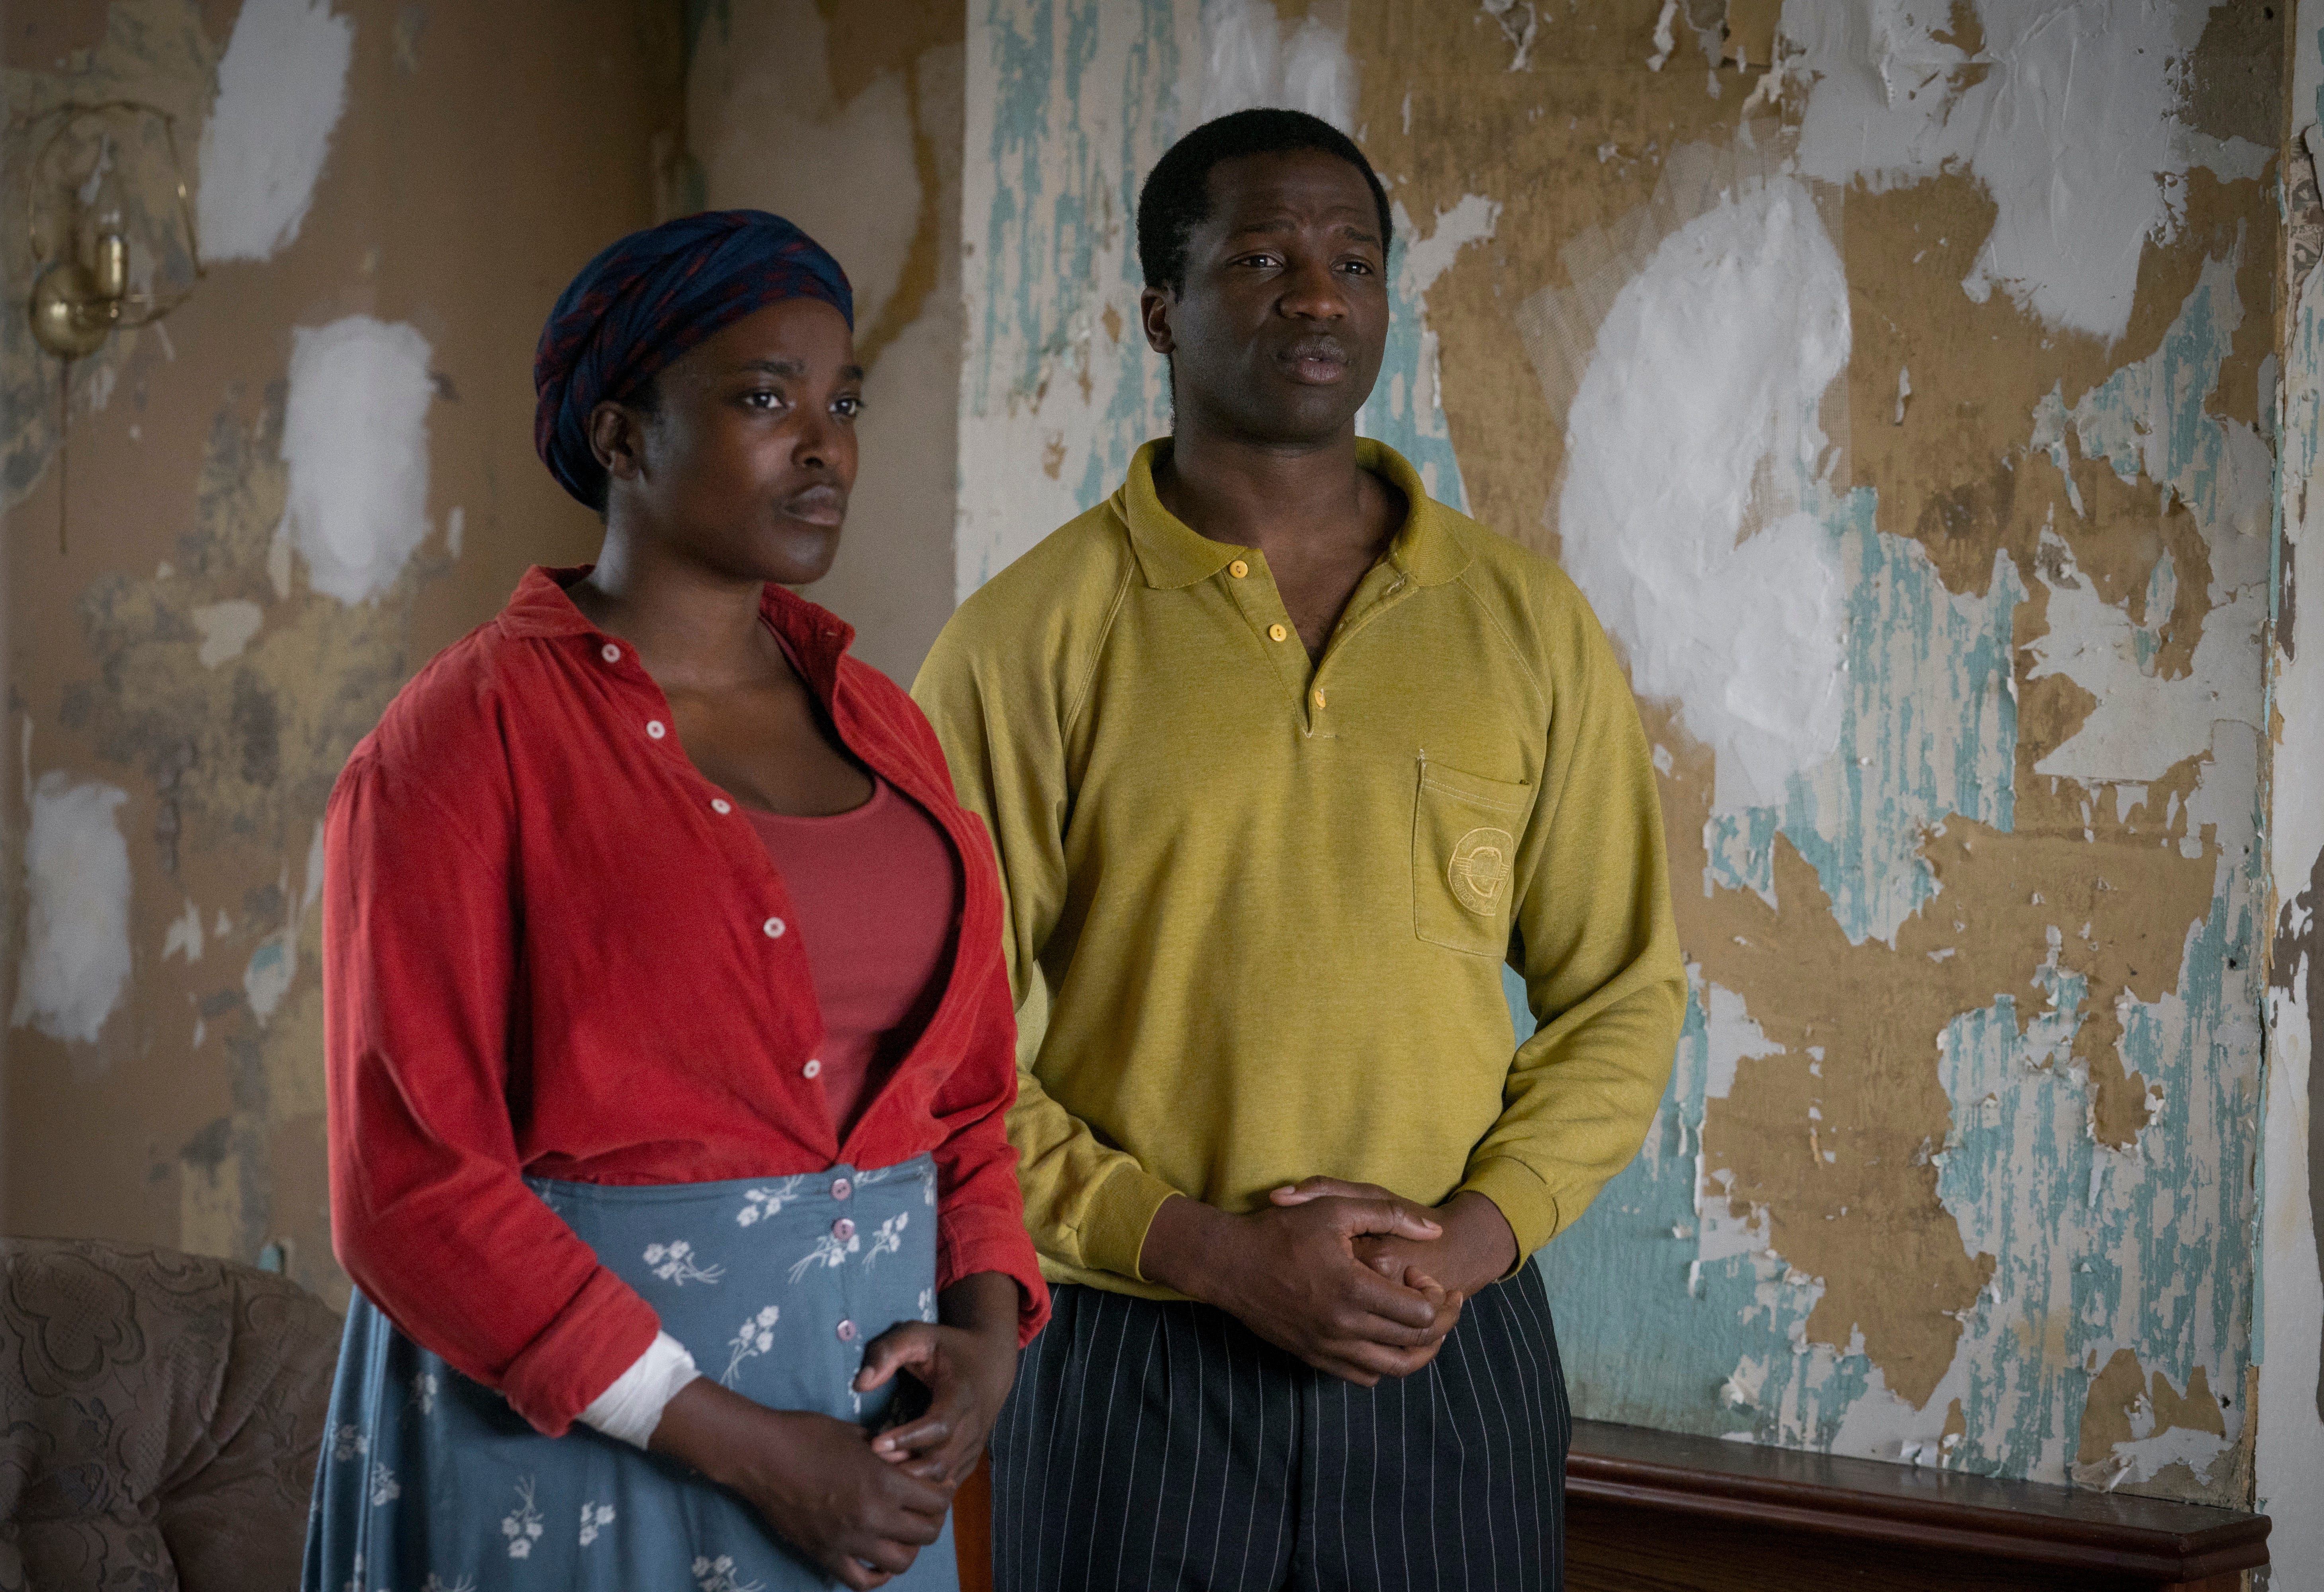 Wunmi Mosaku and Ṣọpẹ Dìrísù are Sudanese refugees who find horrors after they arrive in England in "His House."